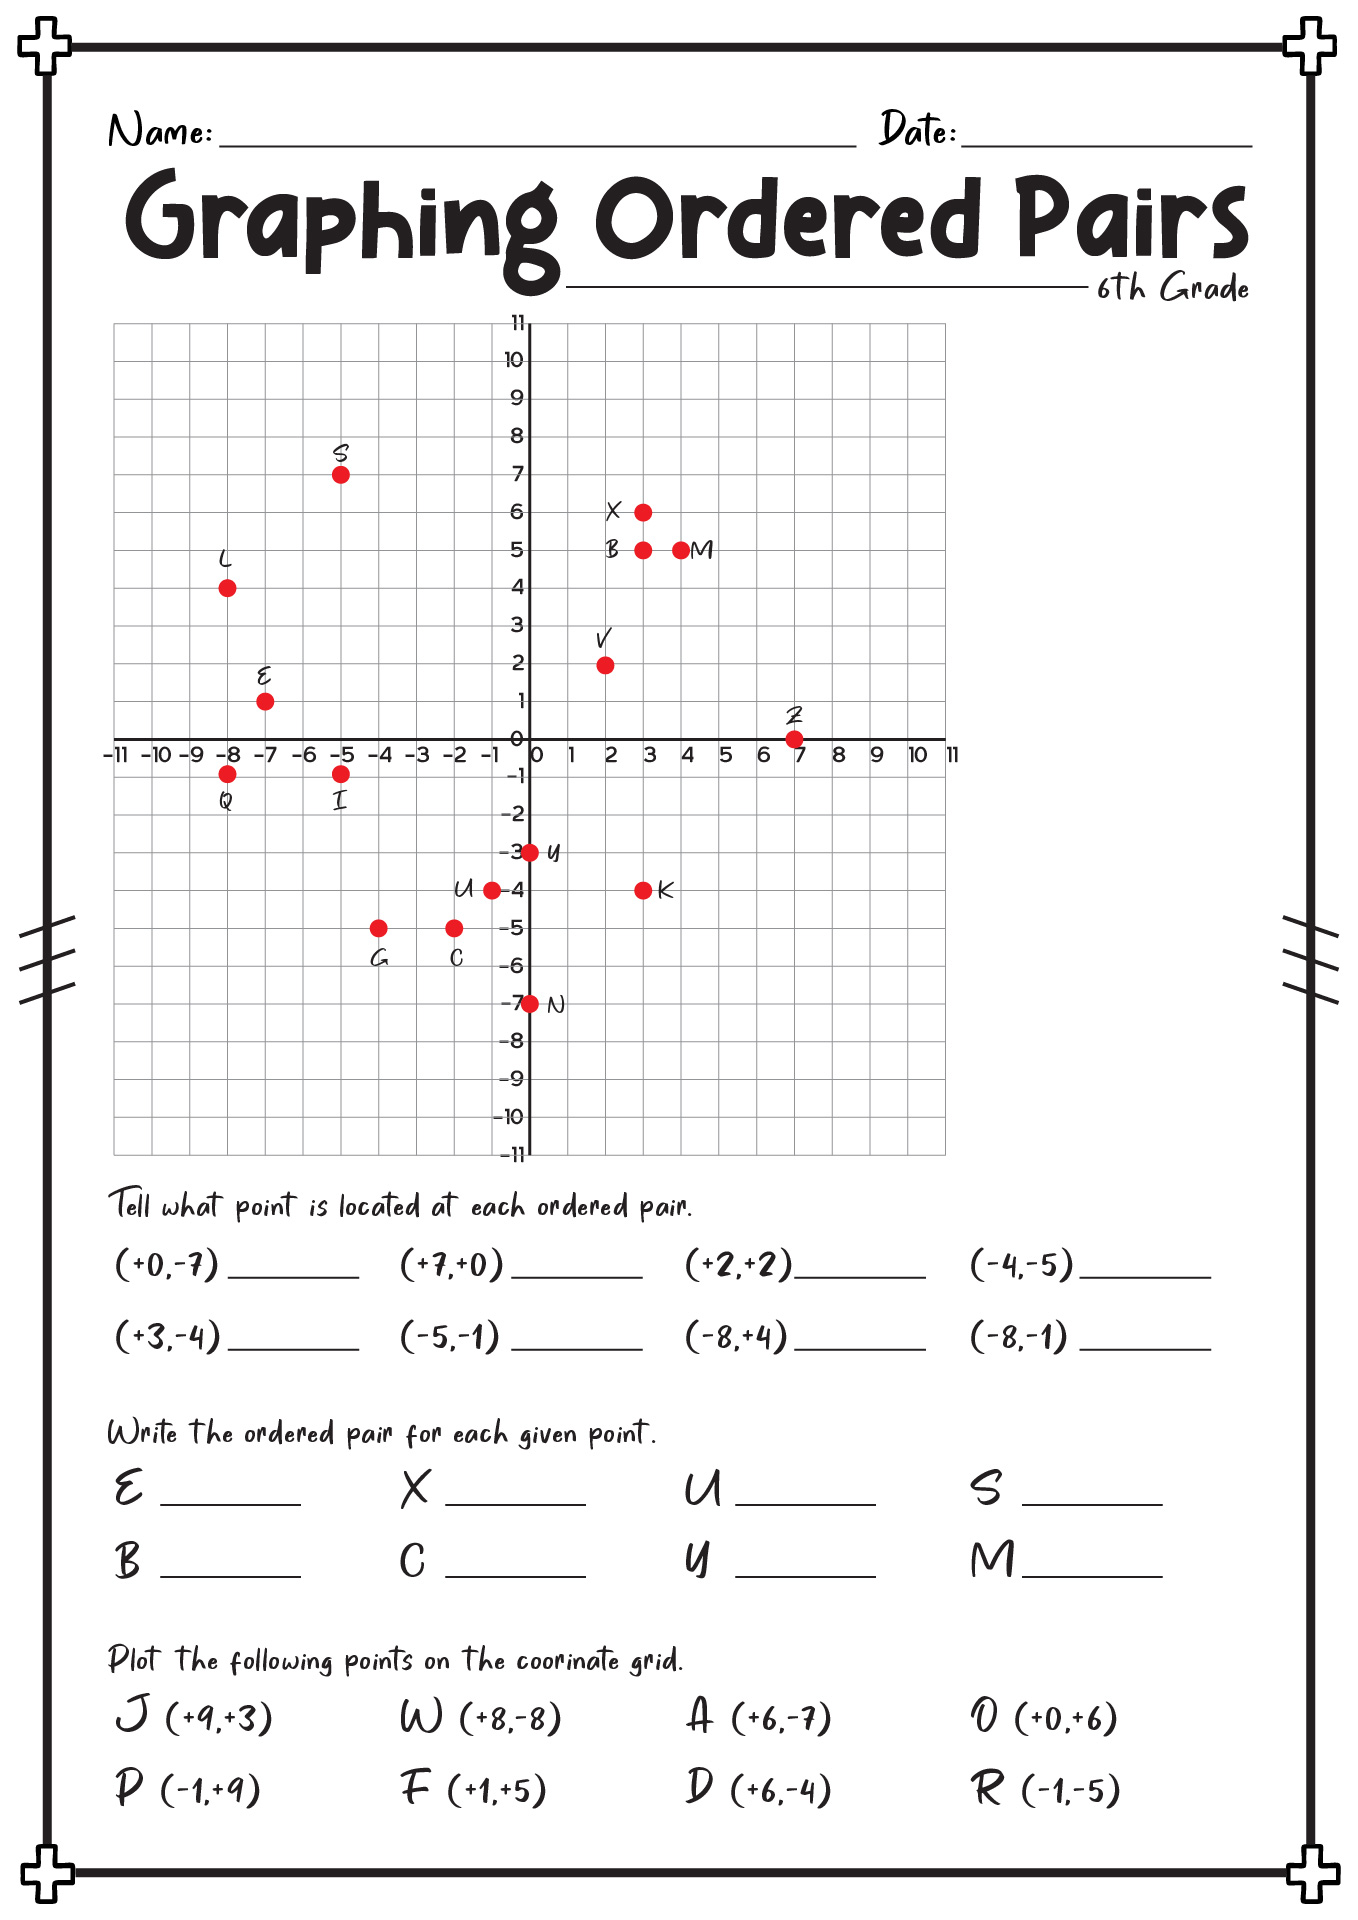 6th Grade Graphing Ordered Pairs Worksheets